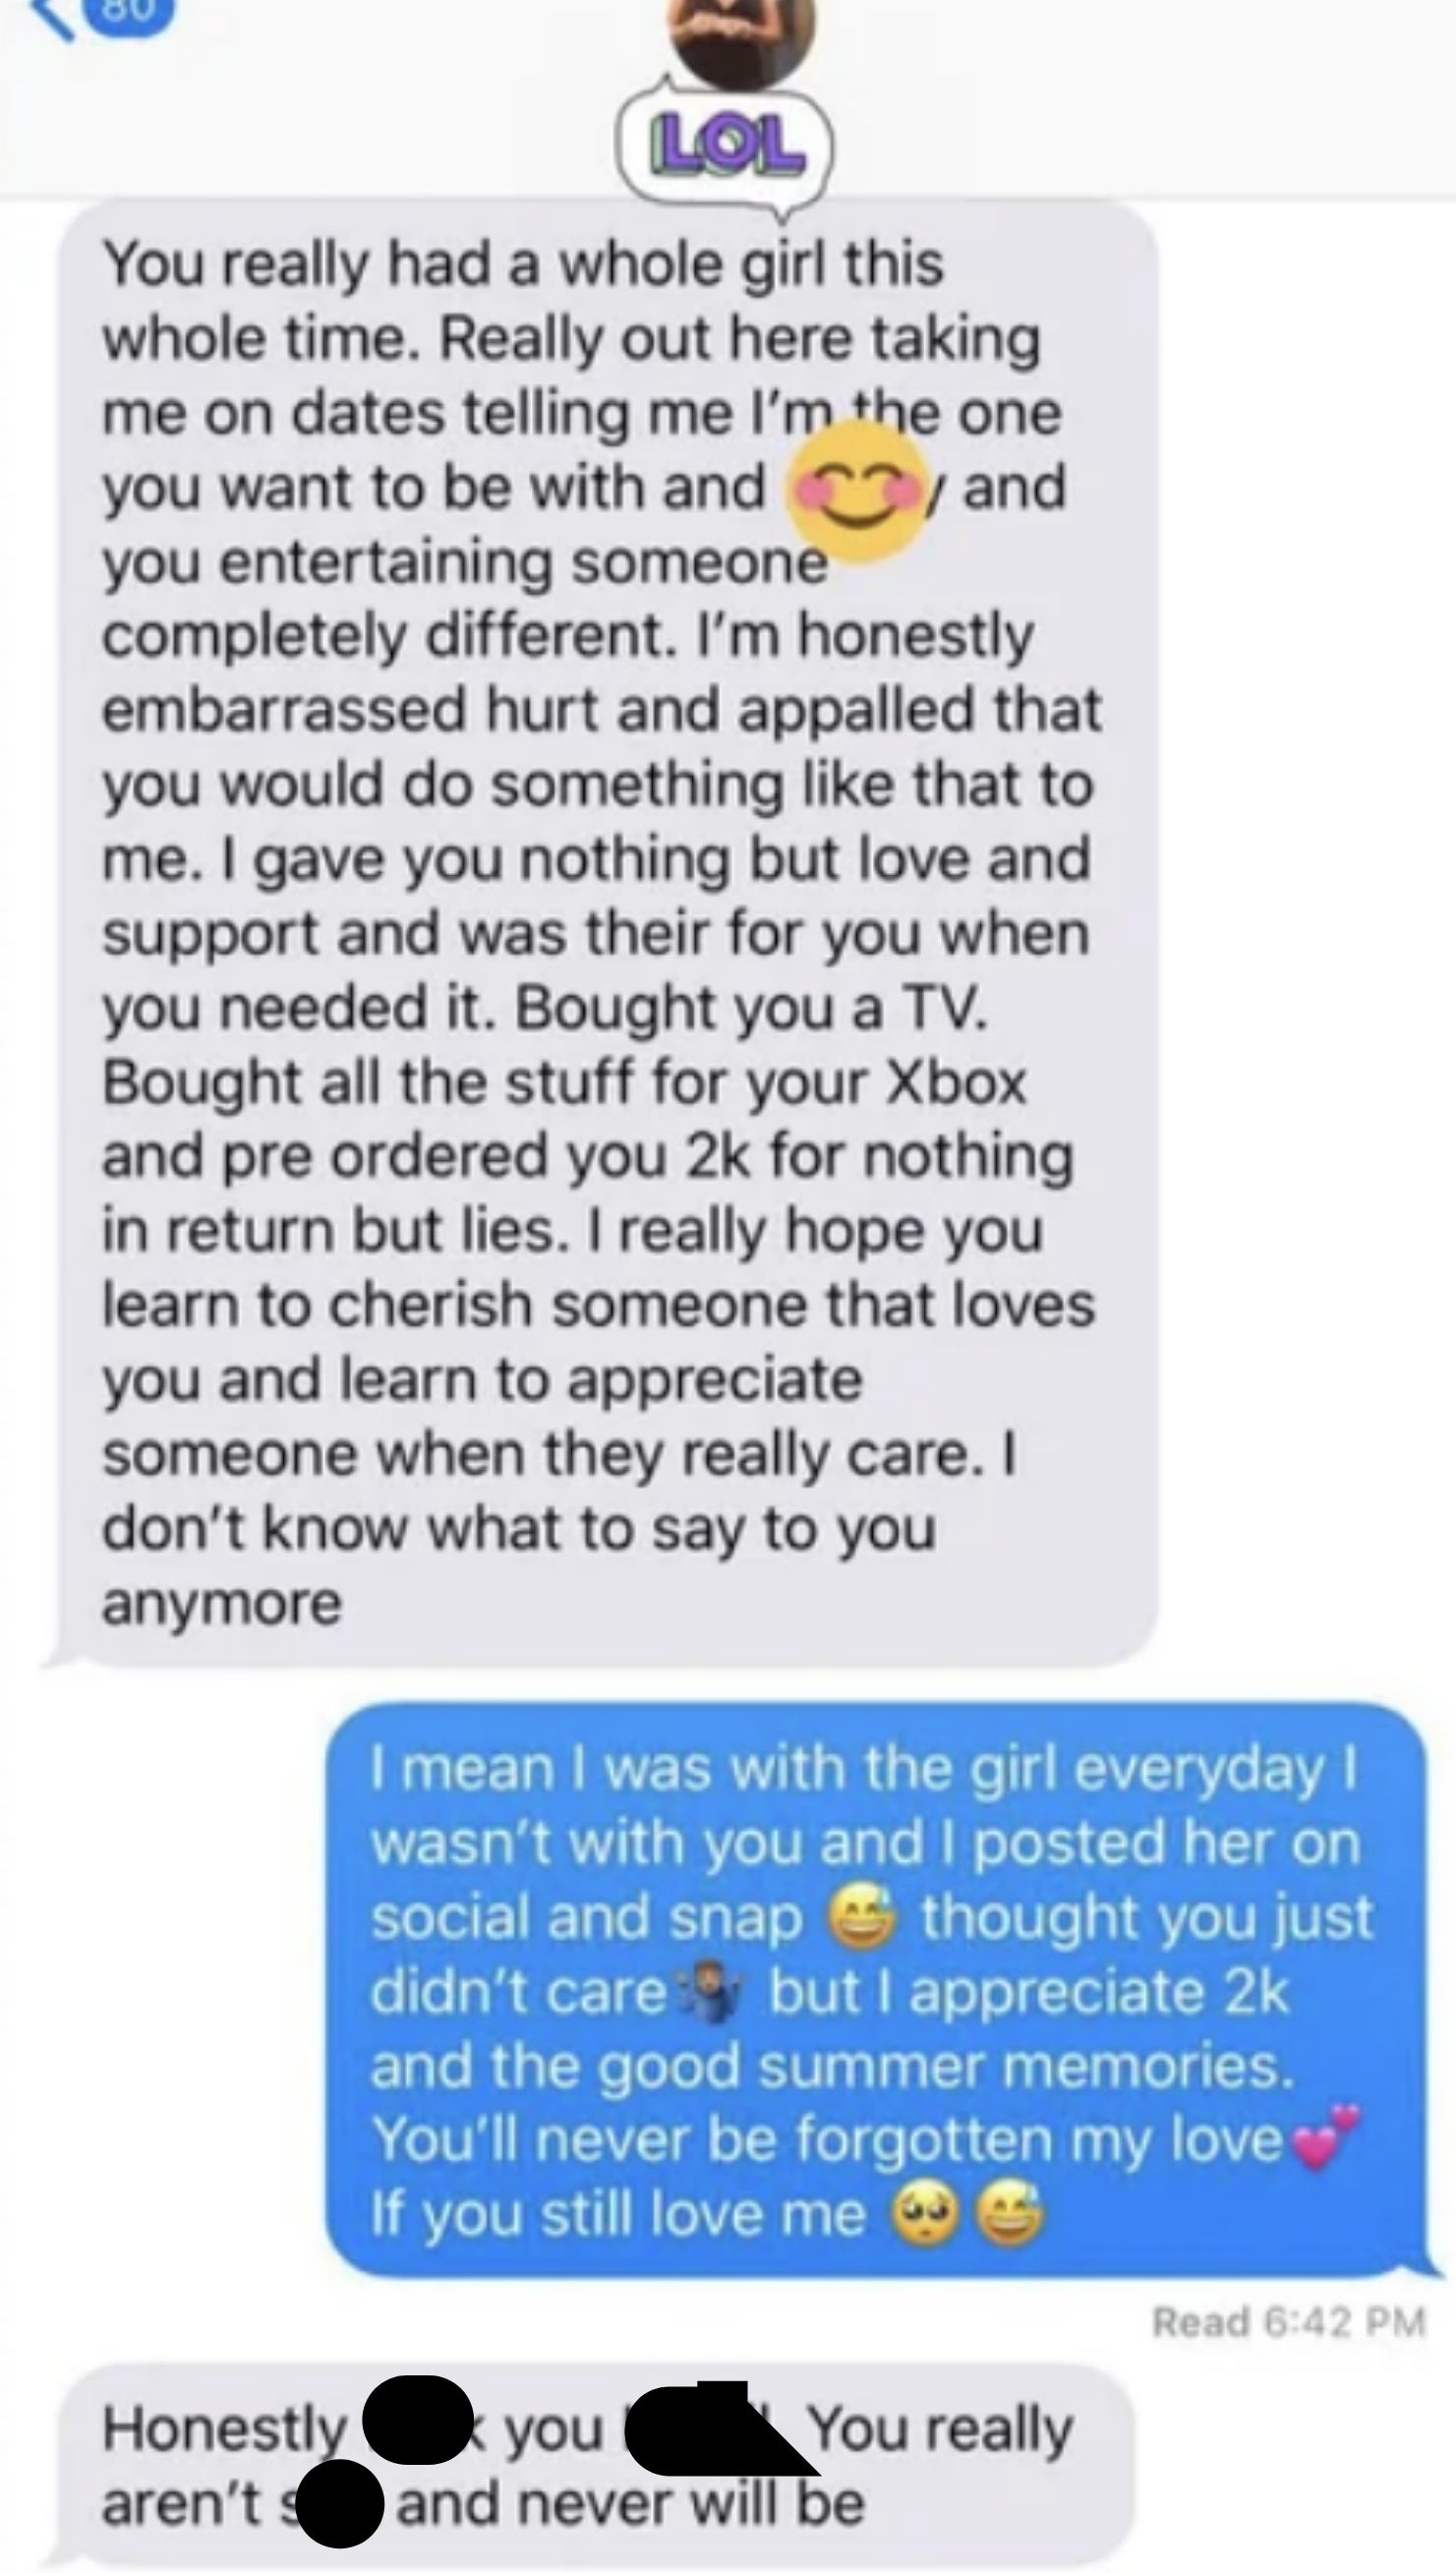 She lists all the ways she gave him love and support, bought him a TV, while he was with another girl; he says &quot;I was with the girl every day I wasn&#x27;t with you and I posted her on social; I thought you just didn&#x27;t care, but I appreciate the good memories&quot;